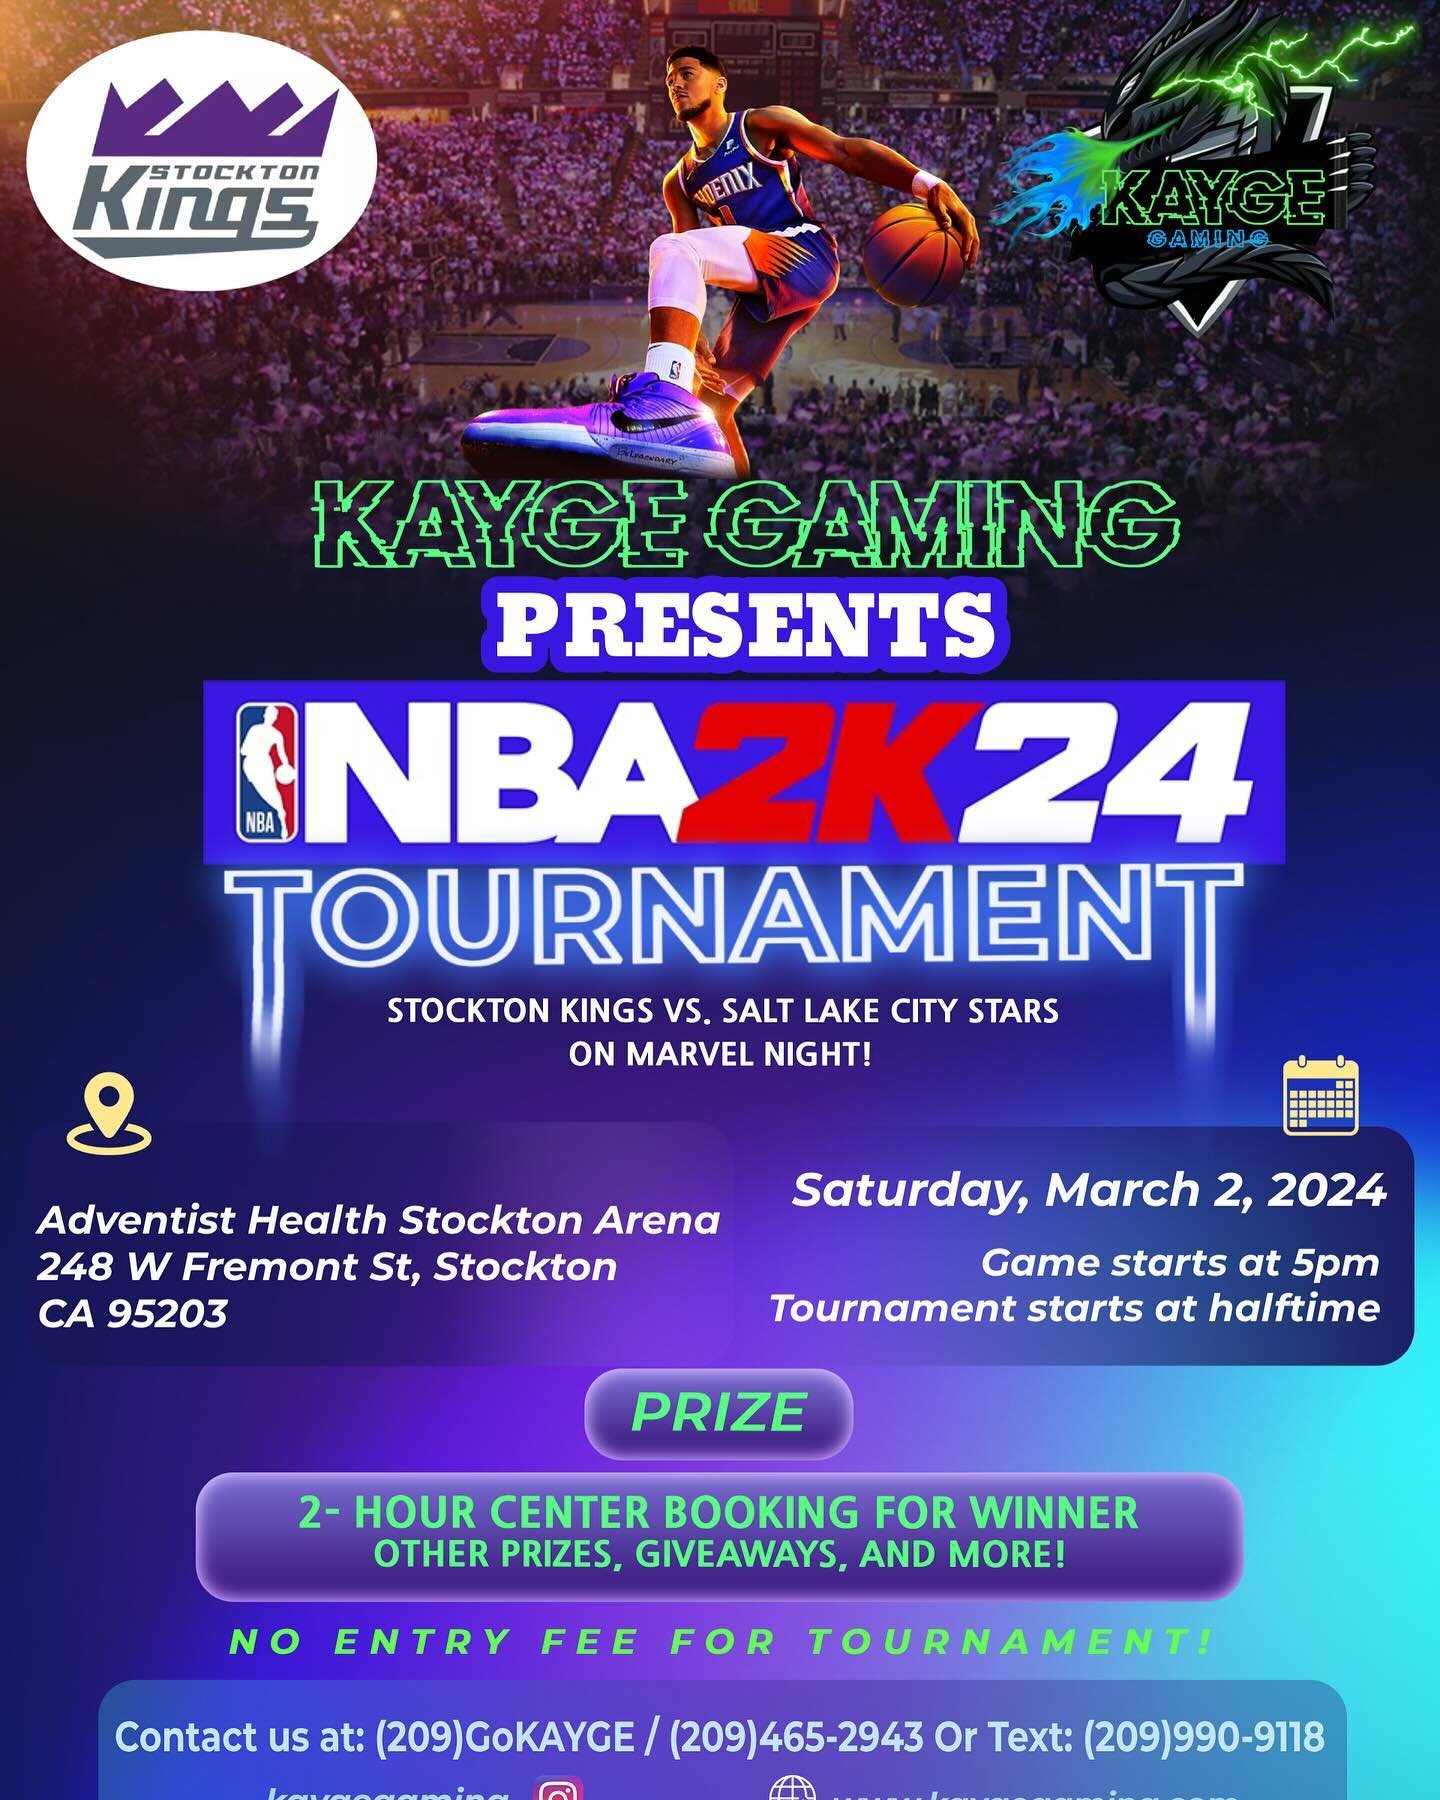 We are sooo excited that this Saturday March 2, we are hosting a 2K24 tournament during the Stockton Kings basketball game!! Winner gets a FREE booking at our Game Center. That&rsquo;s a $500 offer!! Time to Take Kontrol ☝🏿😎🎮 #kaygegaming #2k #sto